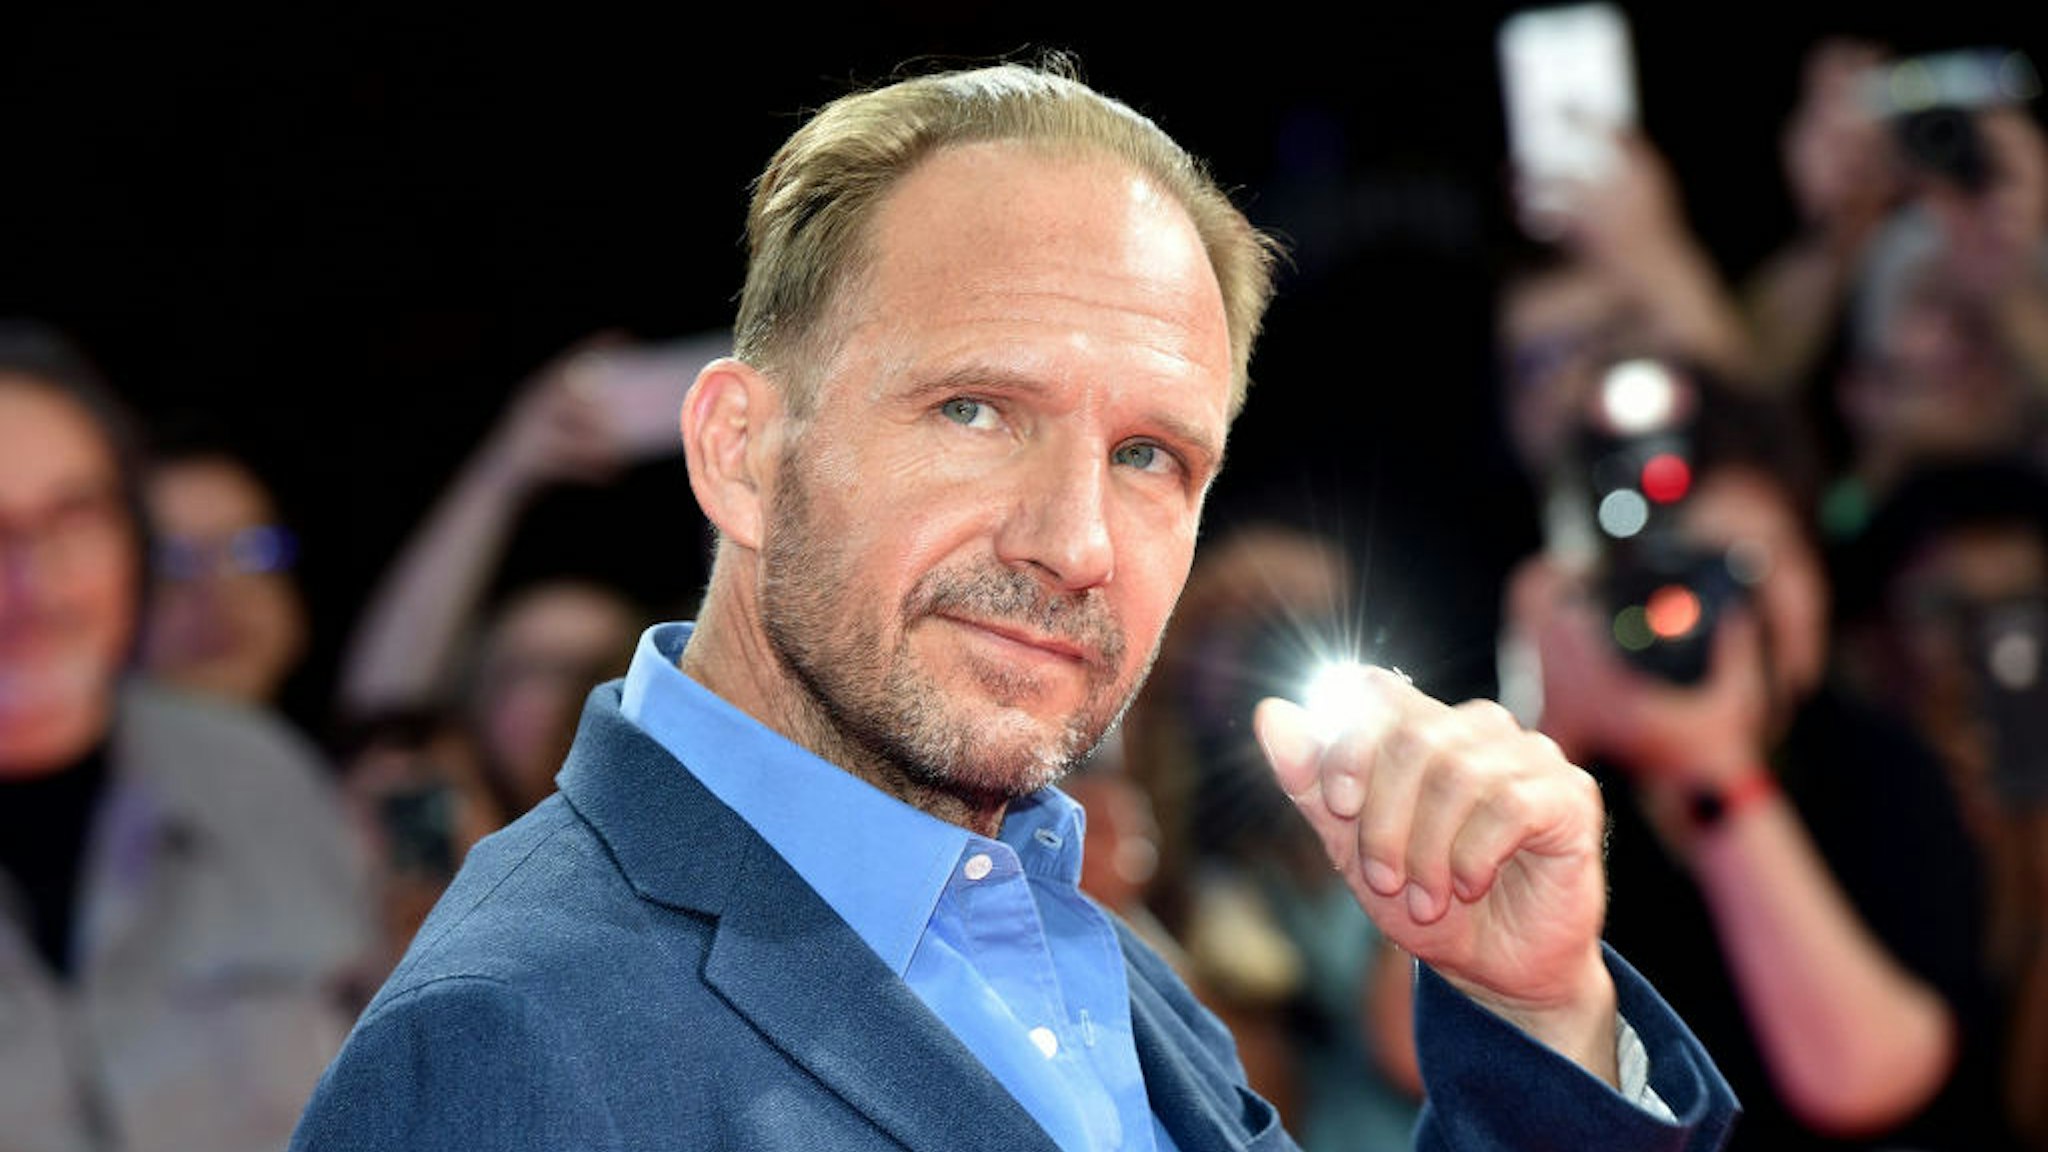 MUNICH, GERMANY - JULY 01: Ralph Fiennes at the CineMerit Gala for Ralph Fiennes during the Munich Film Festival at Gasteig on July 01, 2019 in Munich, Germany. British actor and director Ralph Fiennes is awarded the CineMerit prize for his great contribution to the international film industry. (Photo by Hannes Magerstaedt/Getty Images)